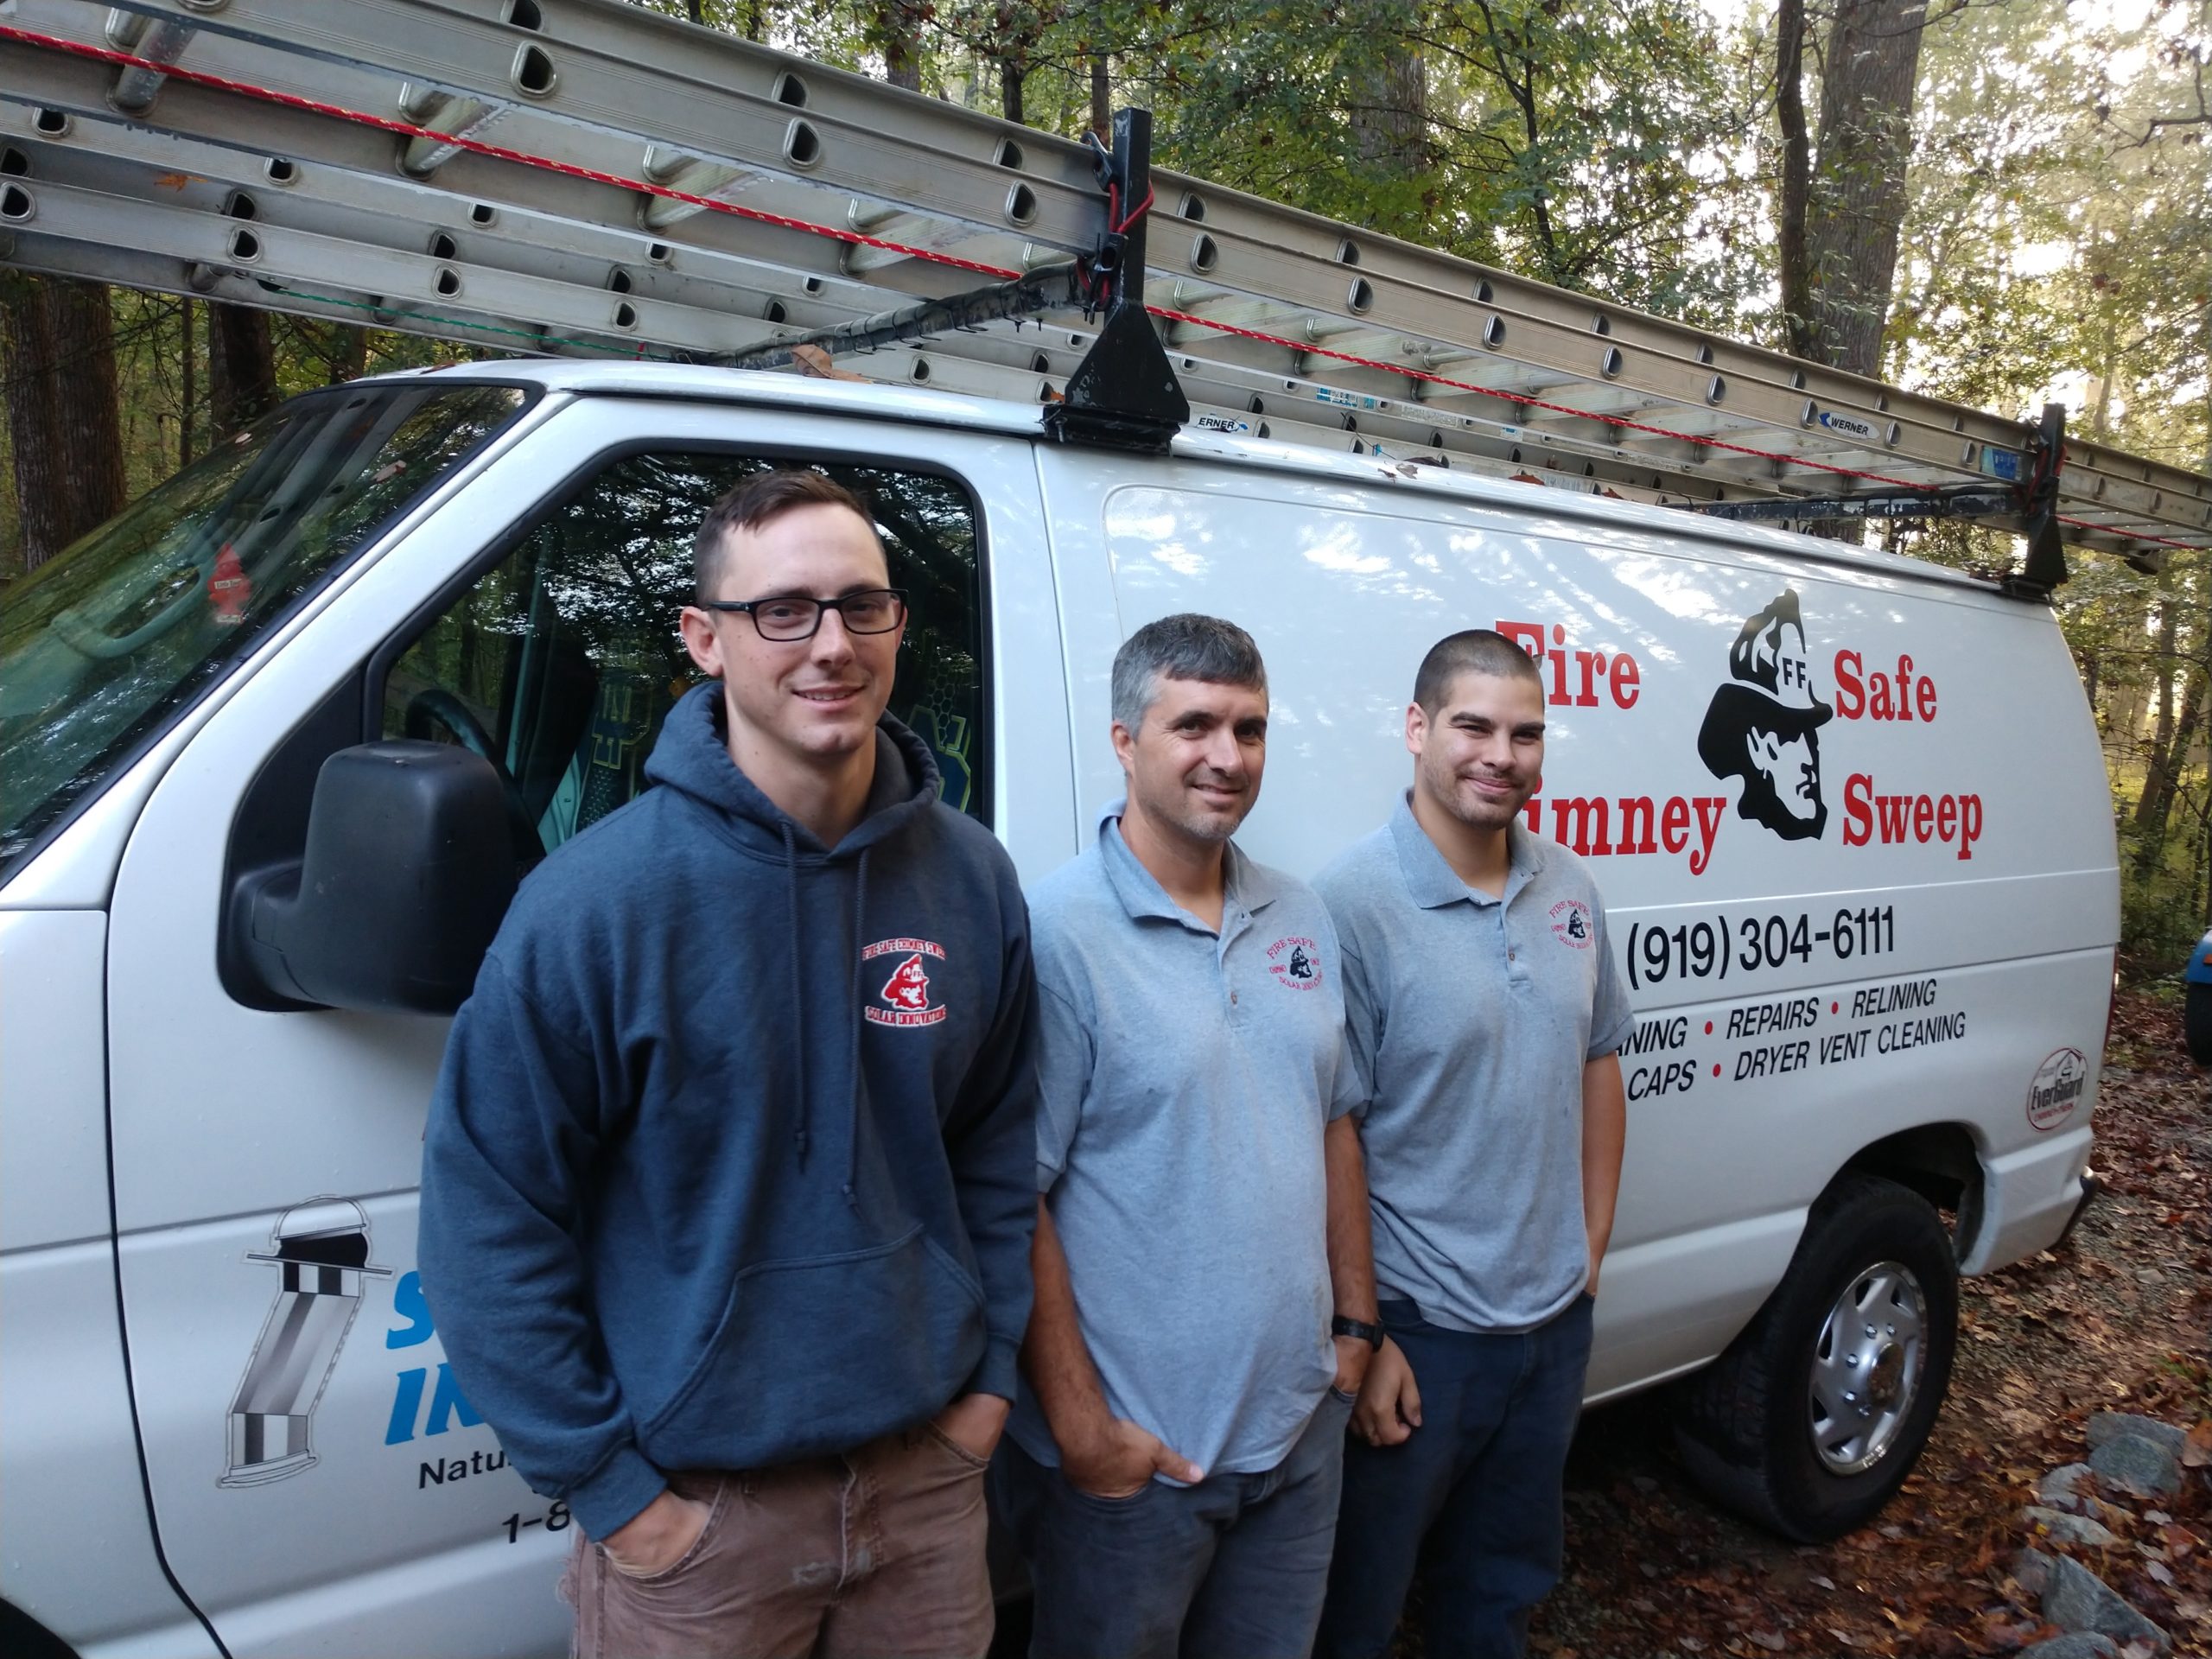 Professional techs Caleb Sharpe, Leonard Rhew, & Kevin Ellis standing in front of Fire Safe  truck with ladders on top